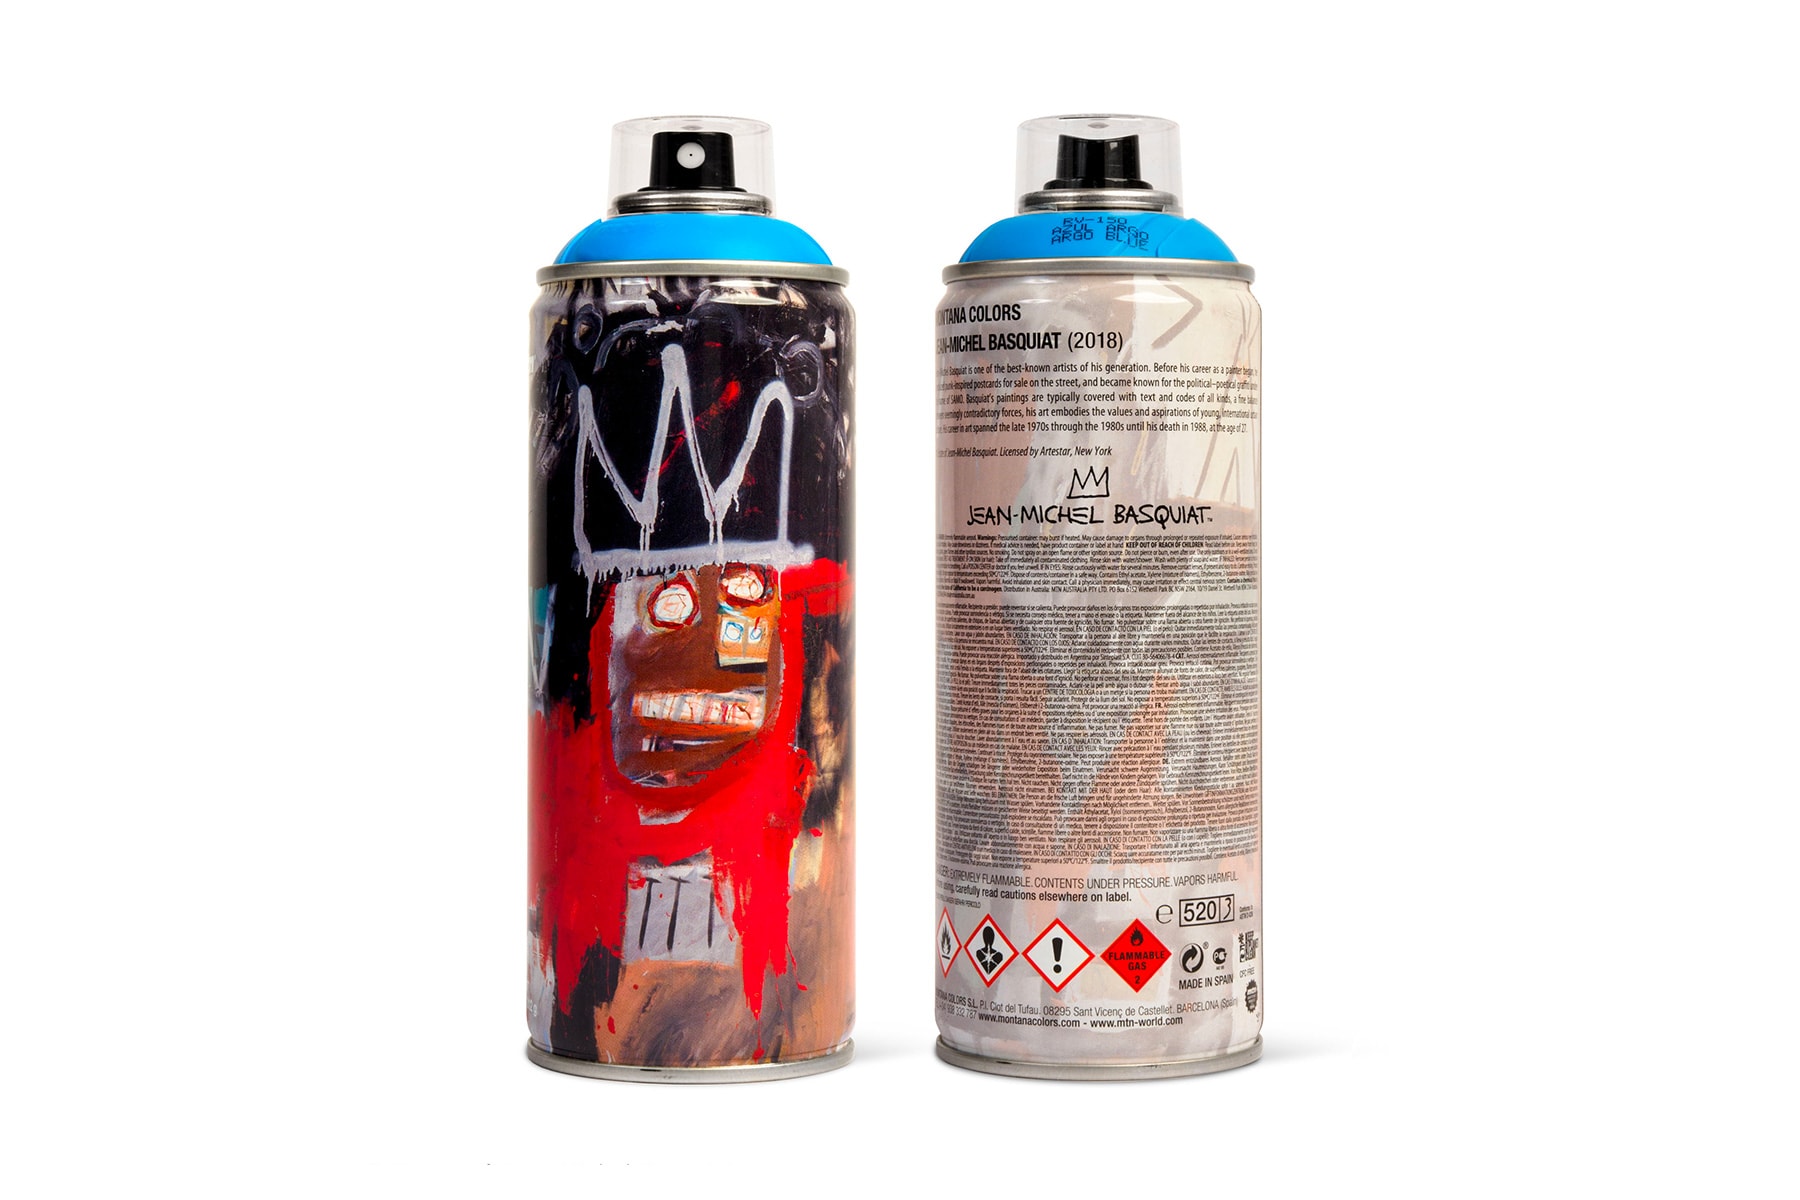 Montana colors Jean jmichel Basquiat Keith Haring Andre Saraiva Spray Paint Cans art graffiti Beyond the streets